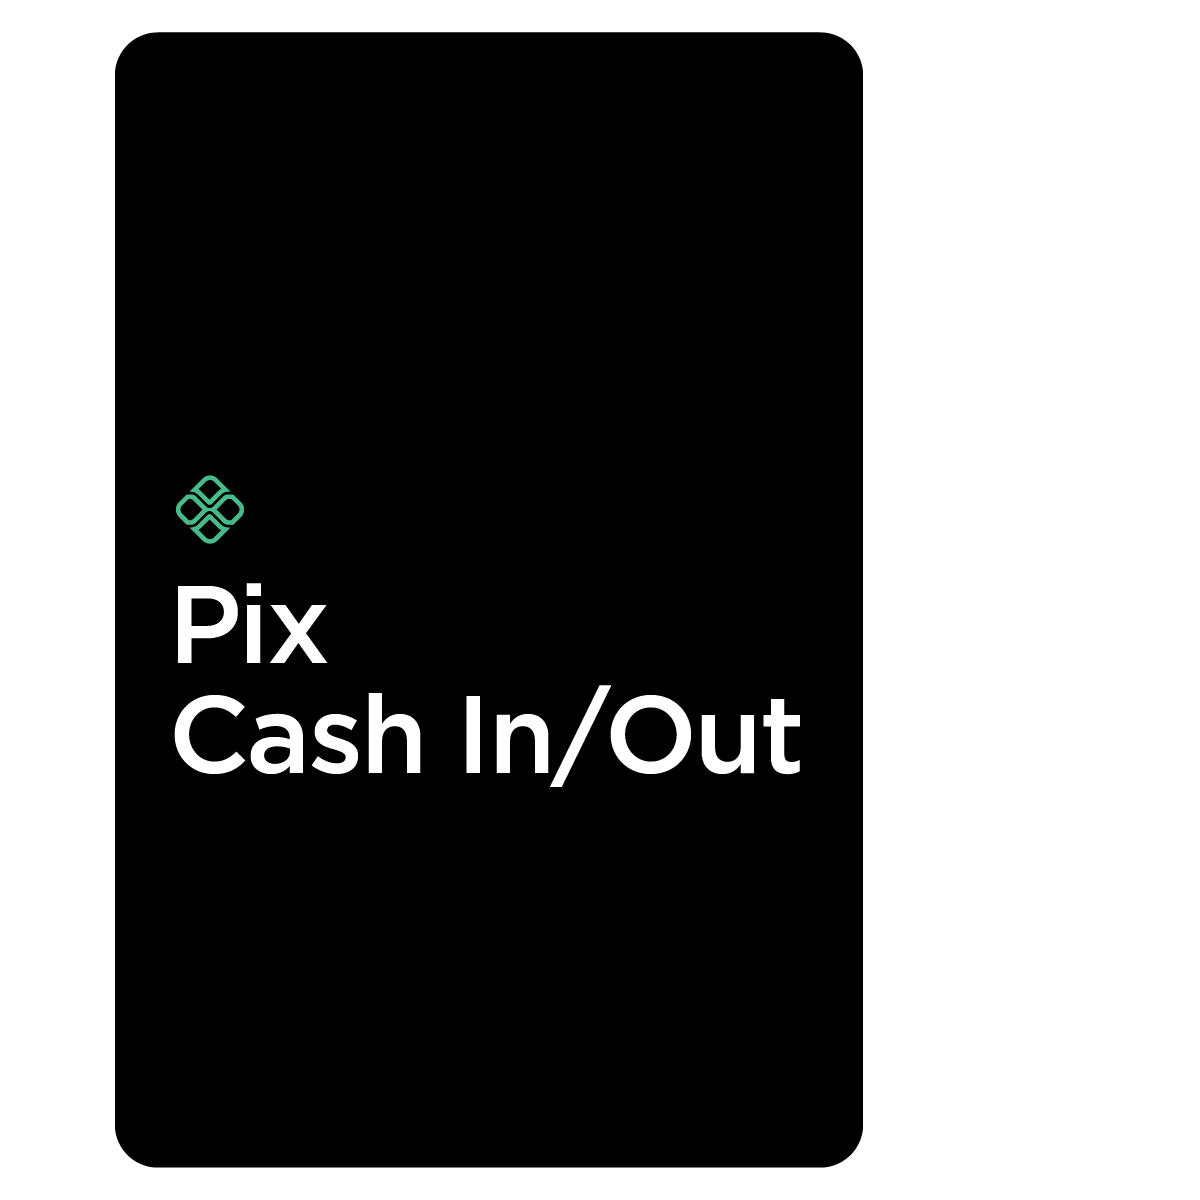 Pix Cash In/ Out